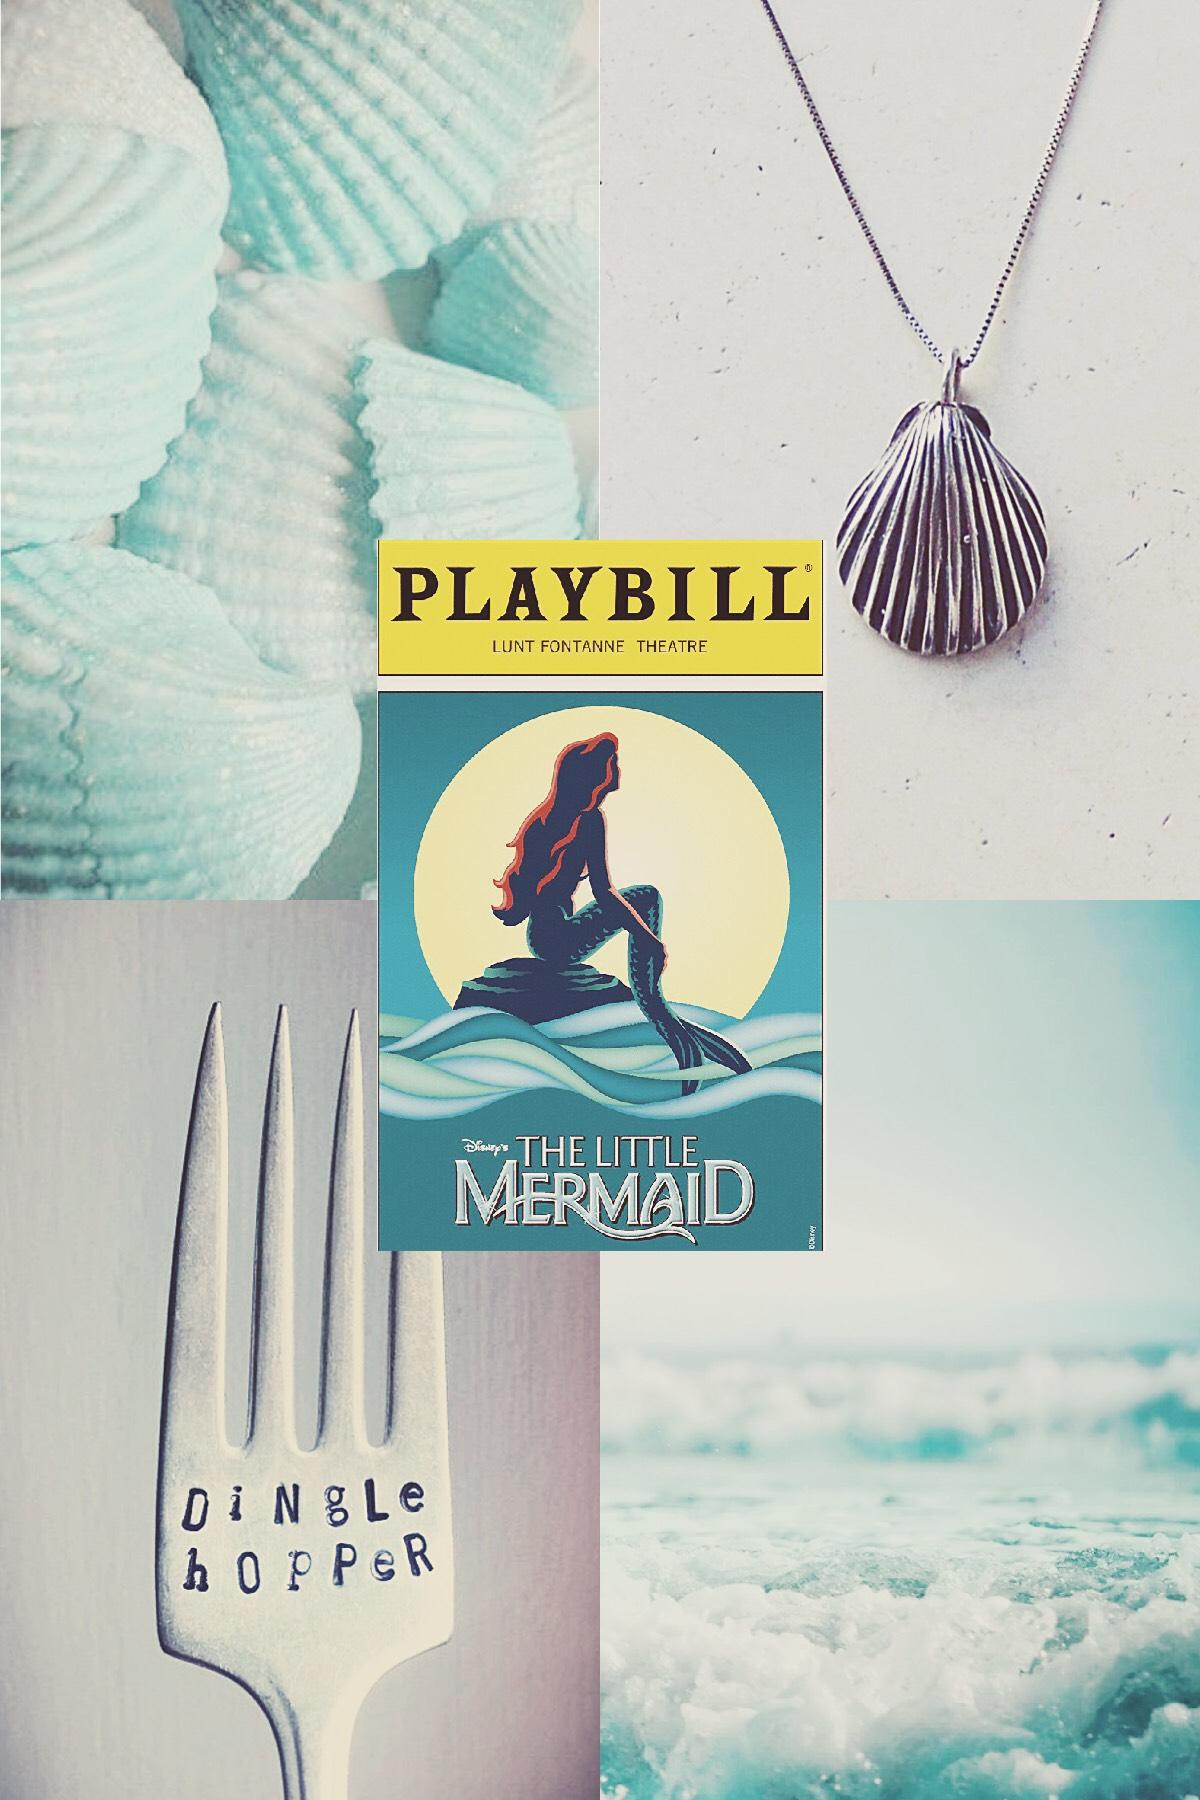 One of my favorite stories The Little Mermaid!
-
If you haven’t heard of the Broadway version, you should totally look into it!